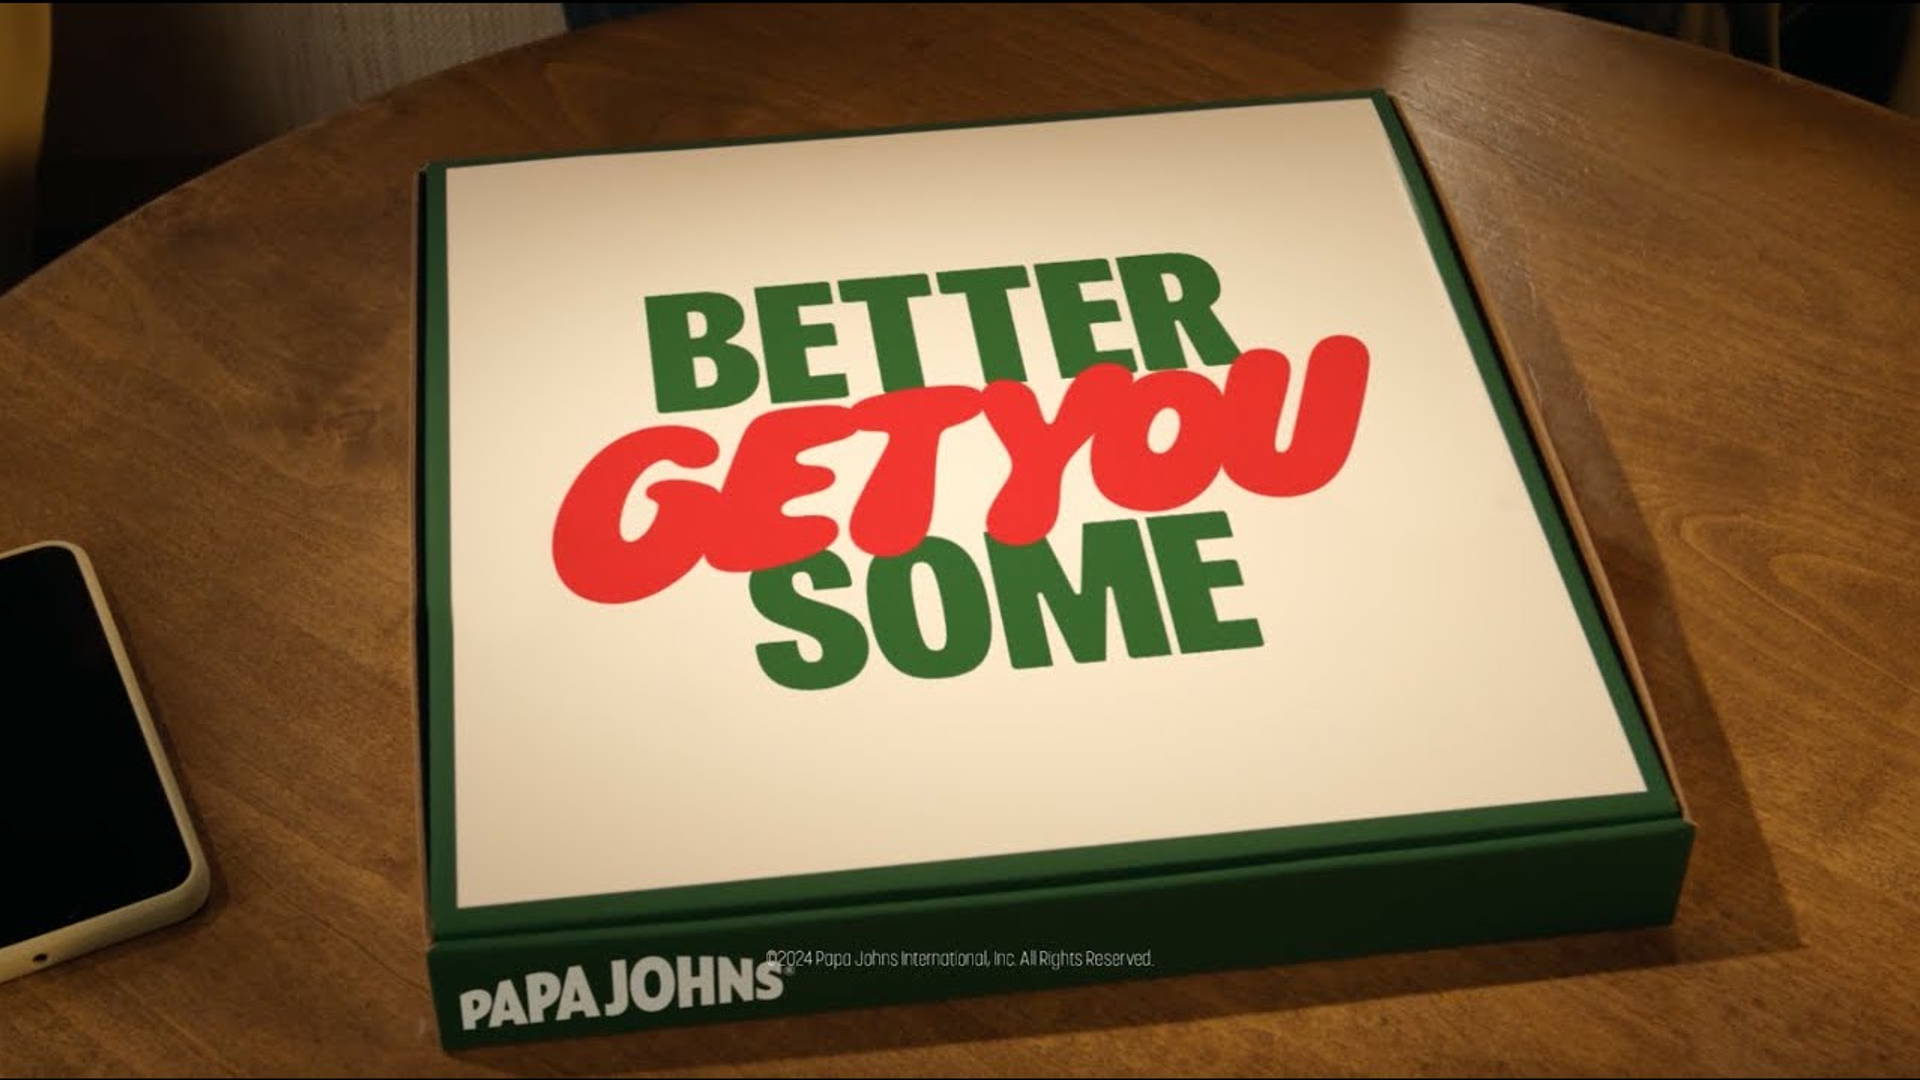 Featured image for The Martin Agency Updates Papa Johns' Brand With 'Better Get You Some' Refresh